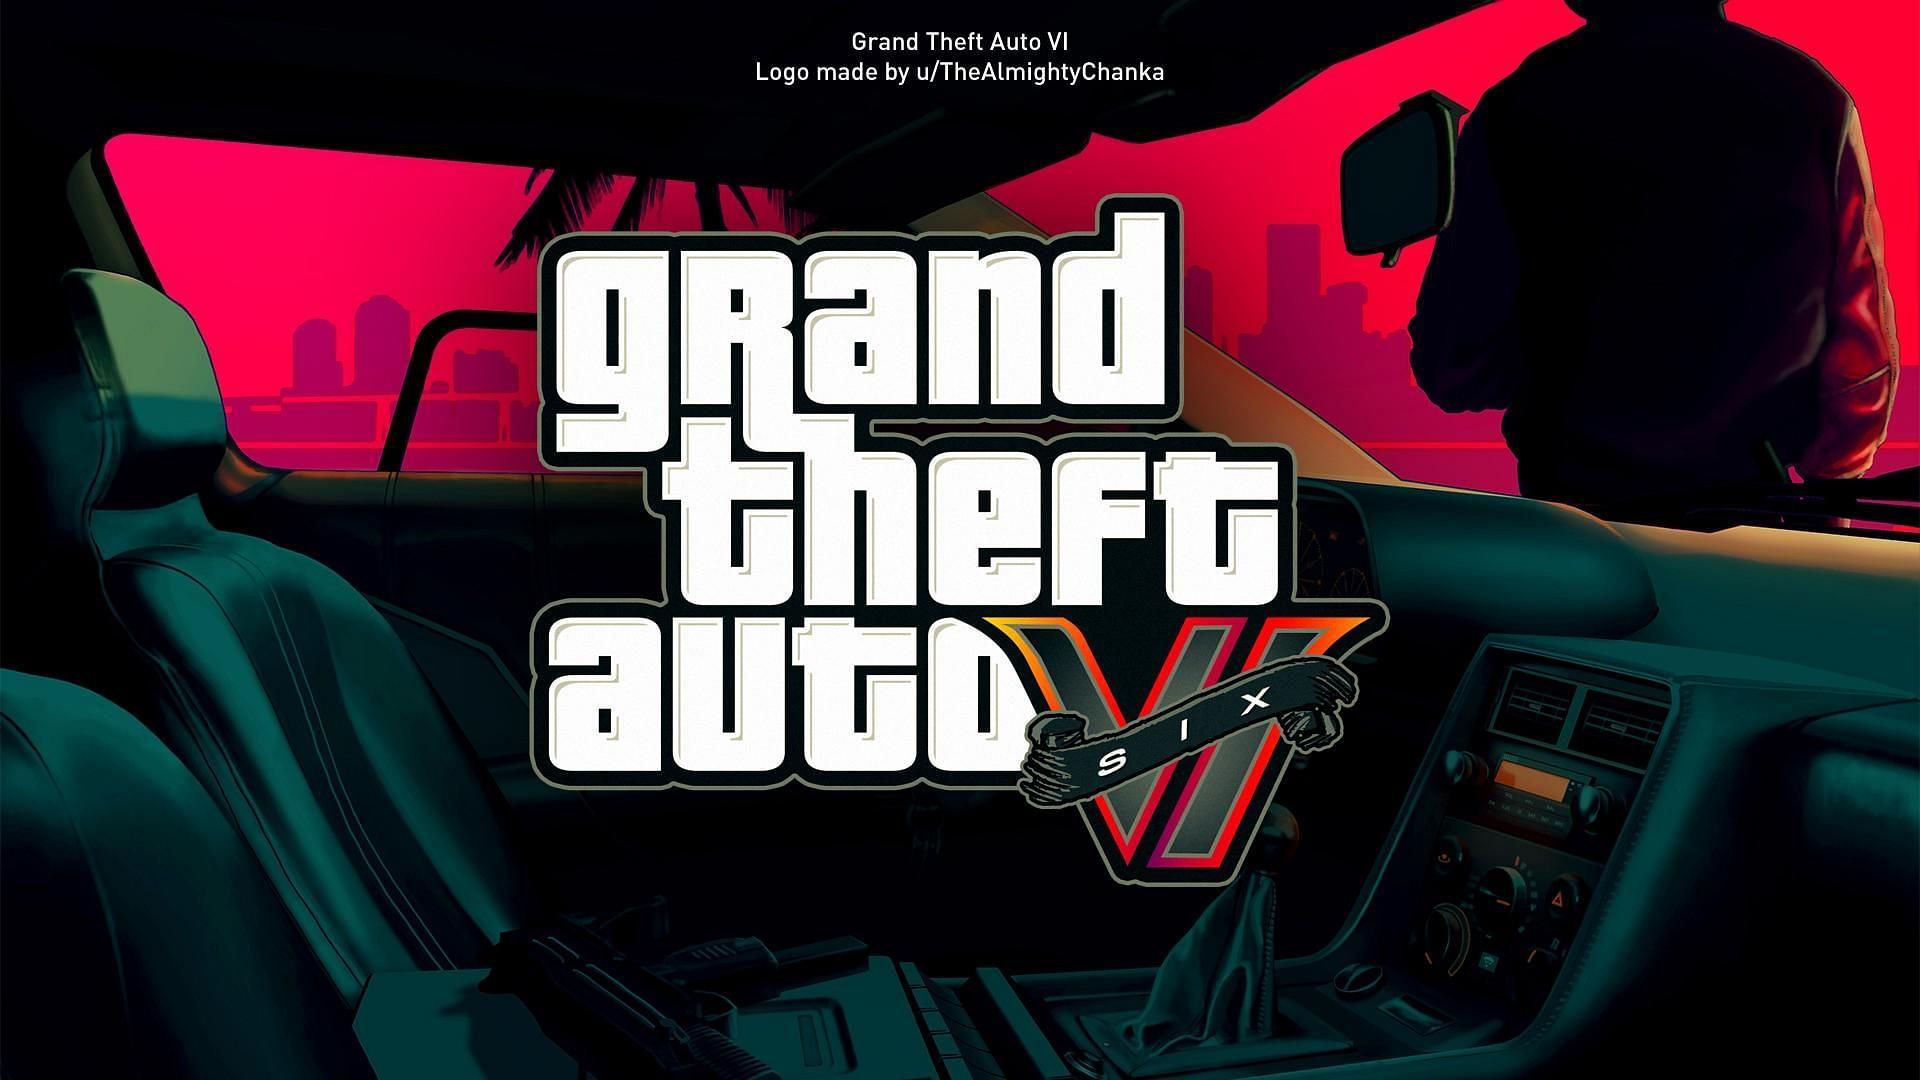 Gamers have an Update on GTA VI. What about Online though?